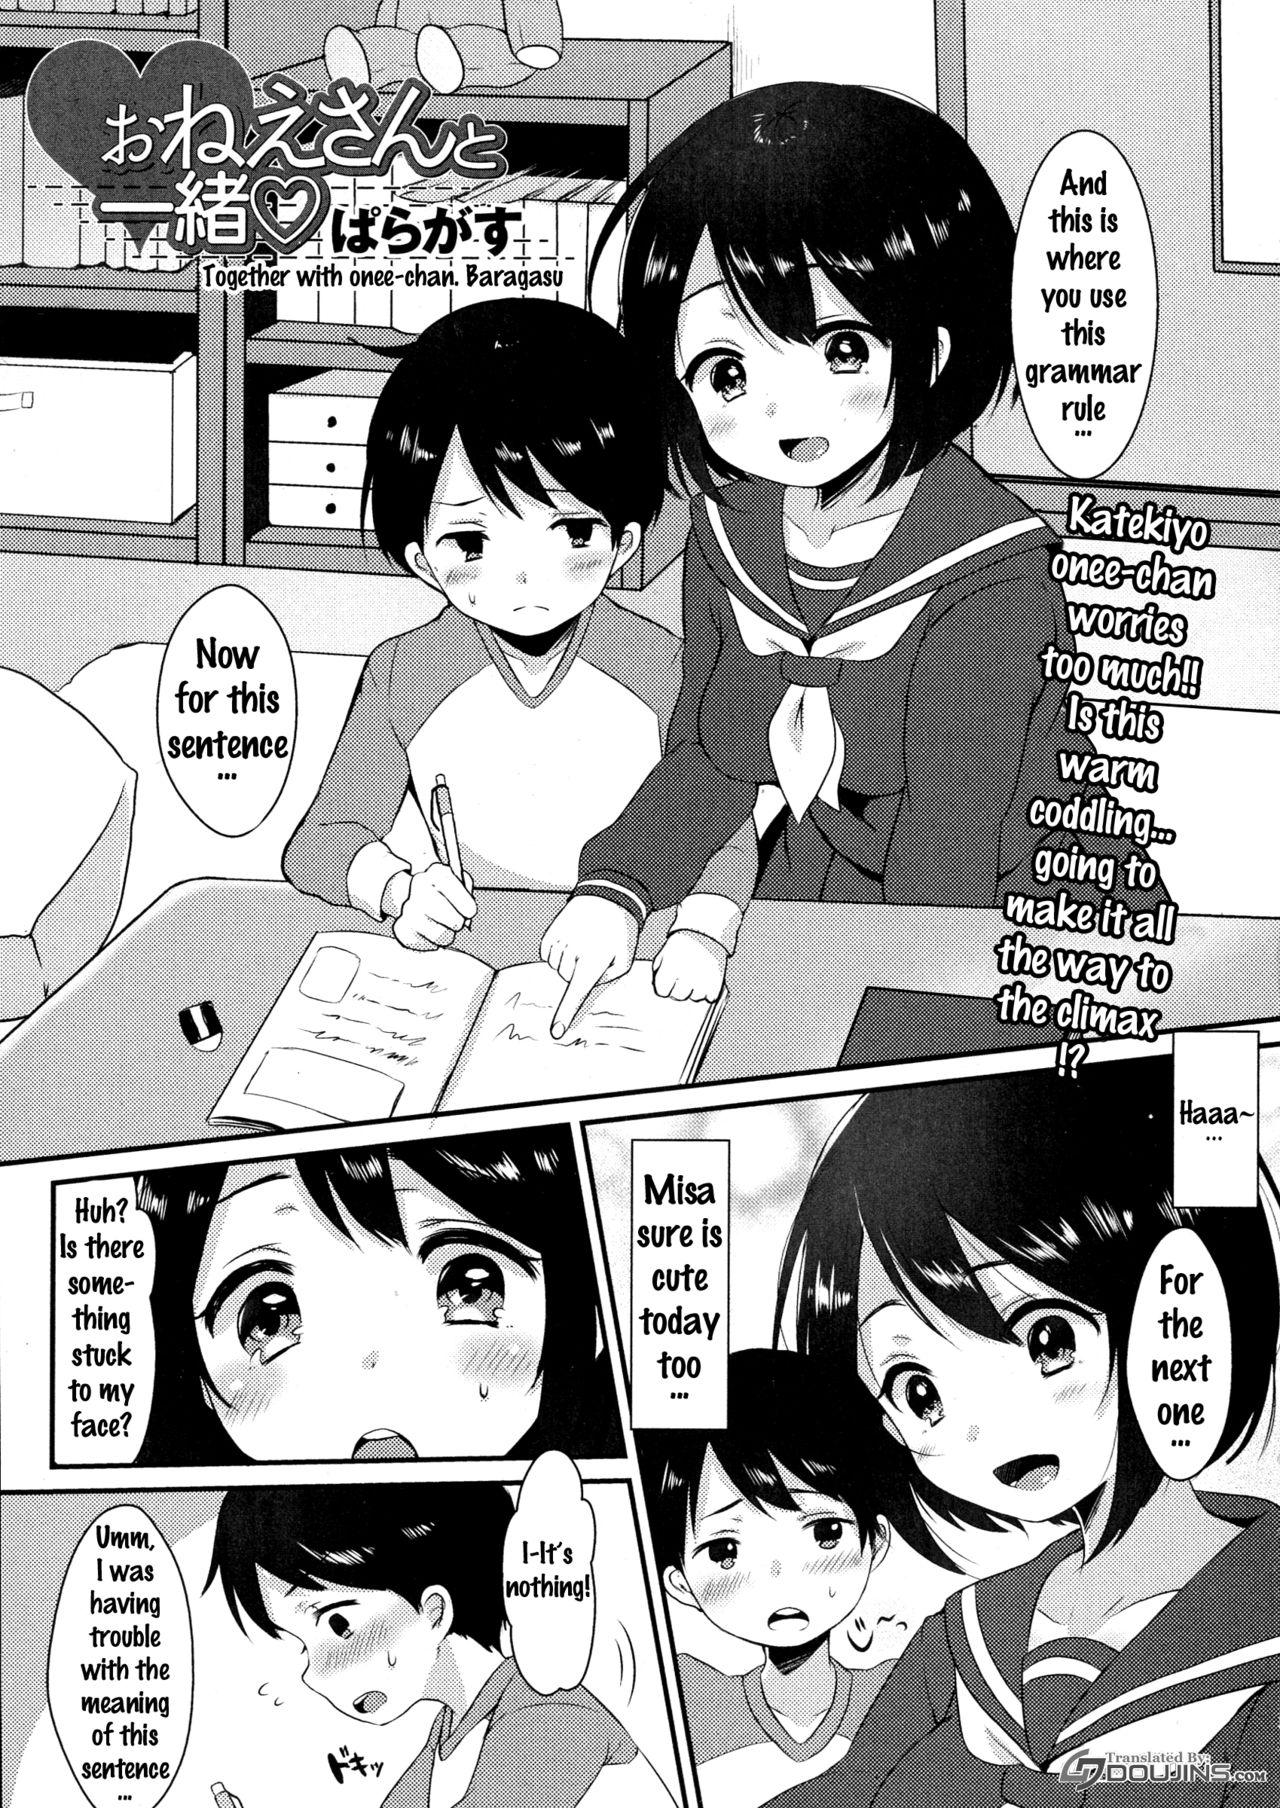 [Paragasu] Onee-san to Issho | Together with Onee-chan (COMIC JSCK Vol. 6) [English] {doujins.com} 0